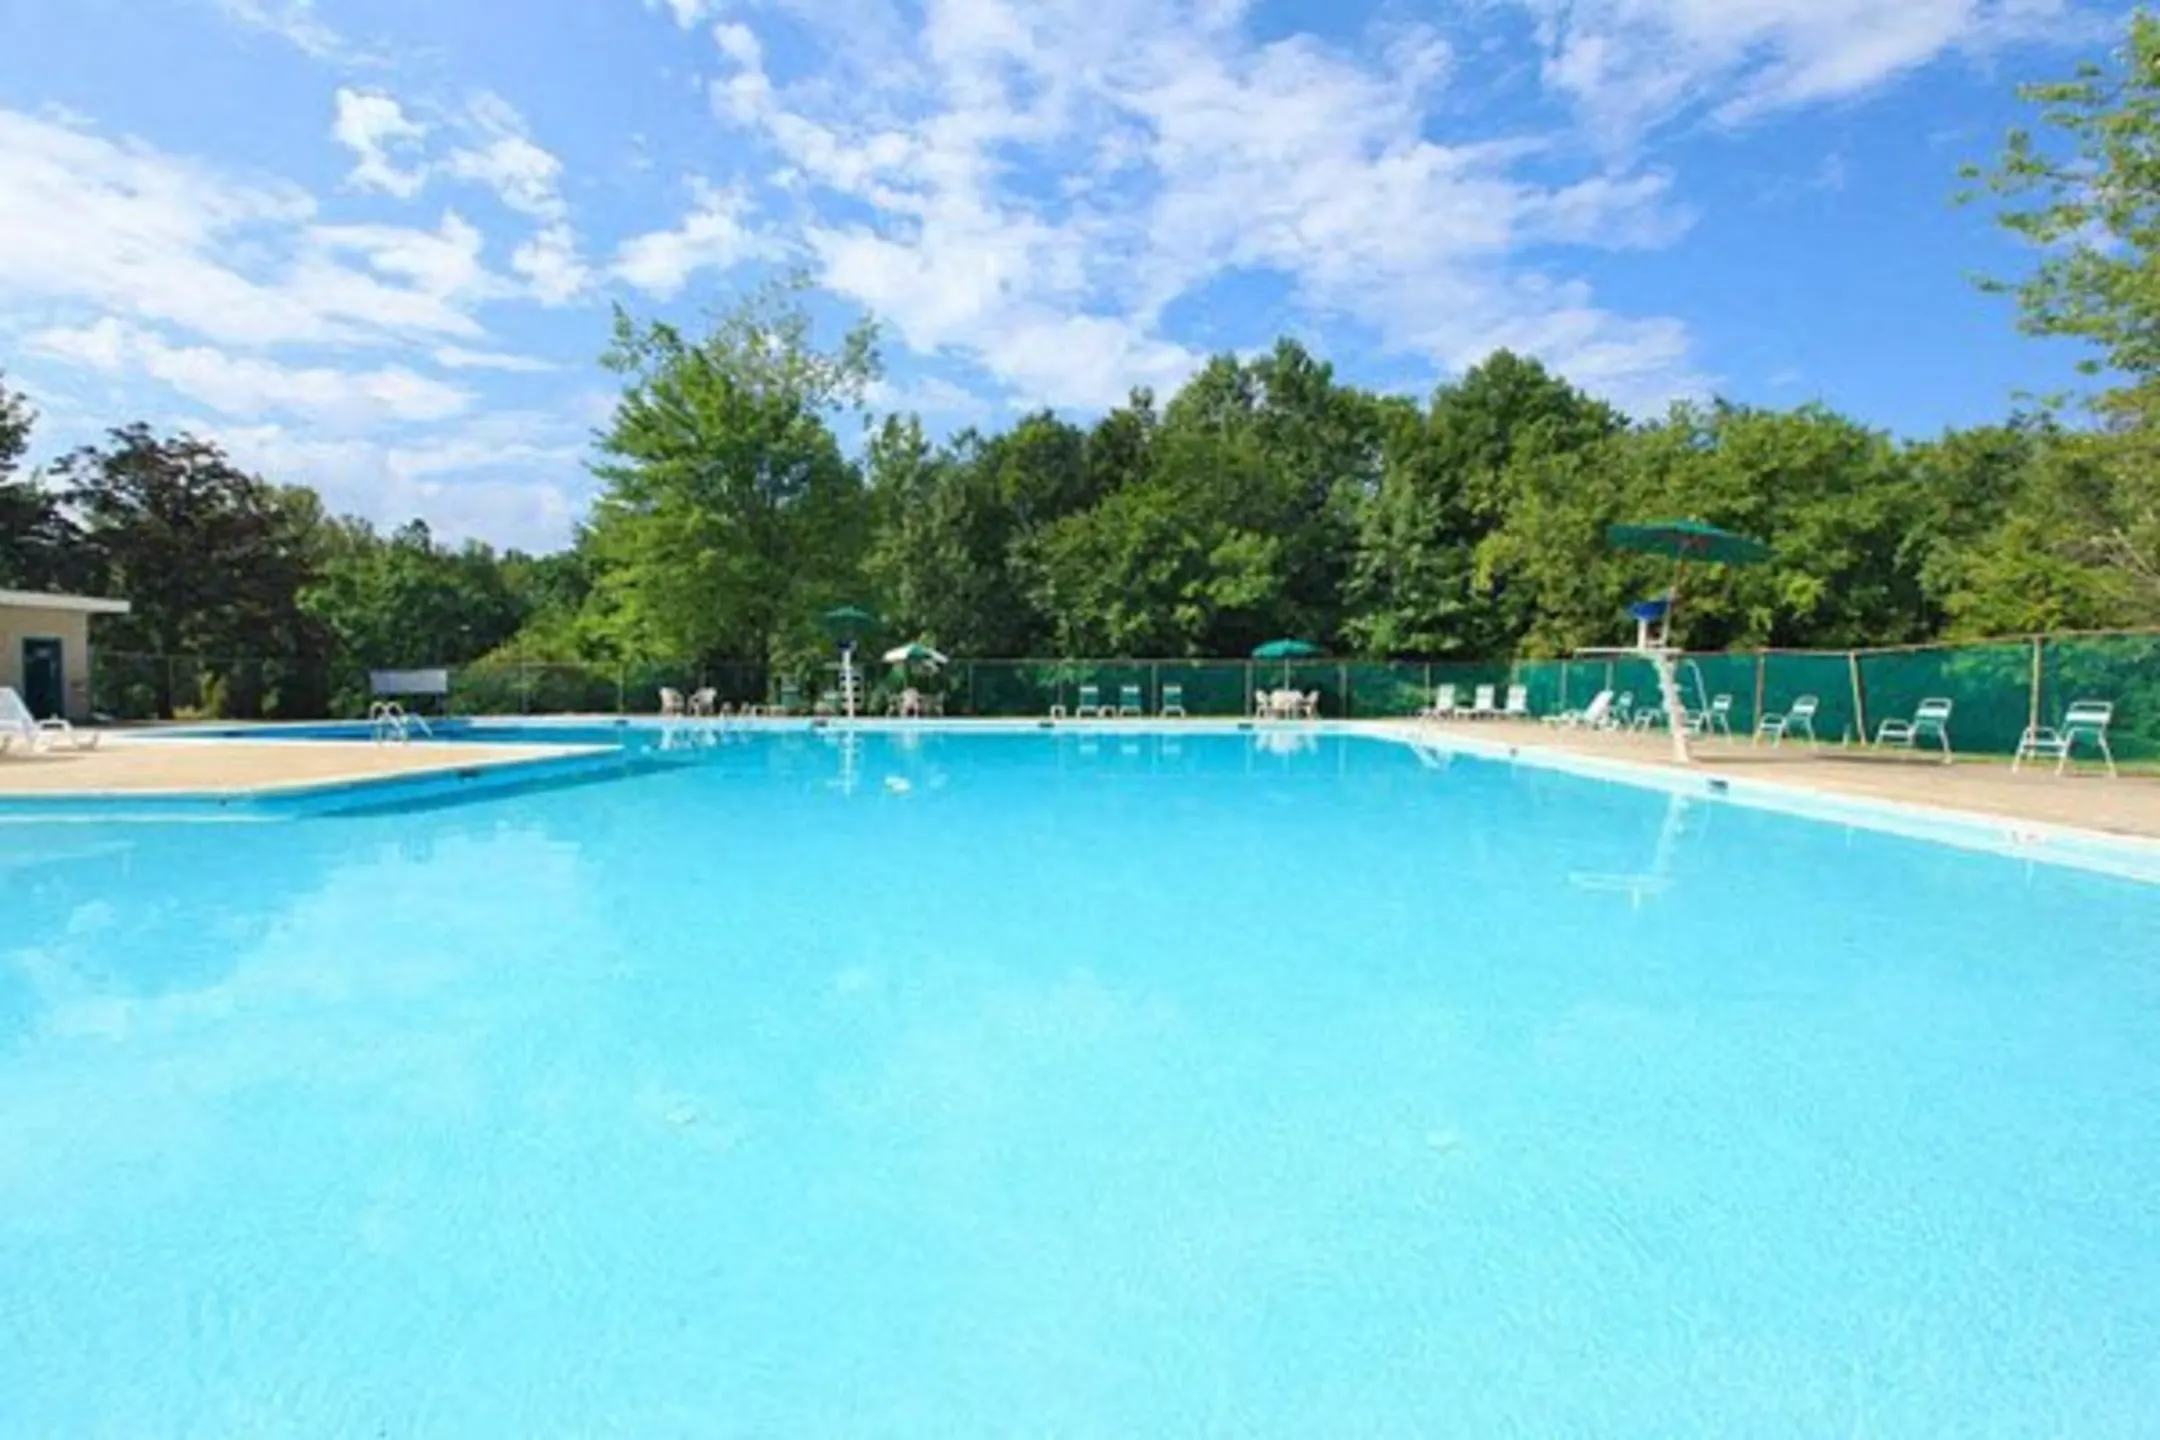 Pool - Cedar Gardens & Towers Apartments & Townhomes - Windsor Mill, MD